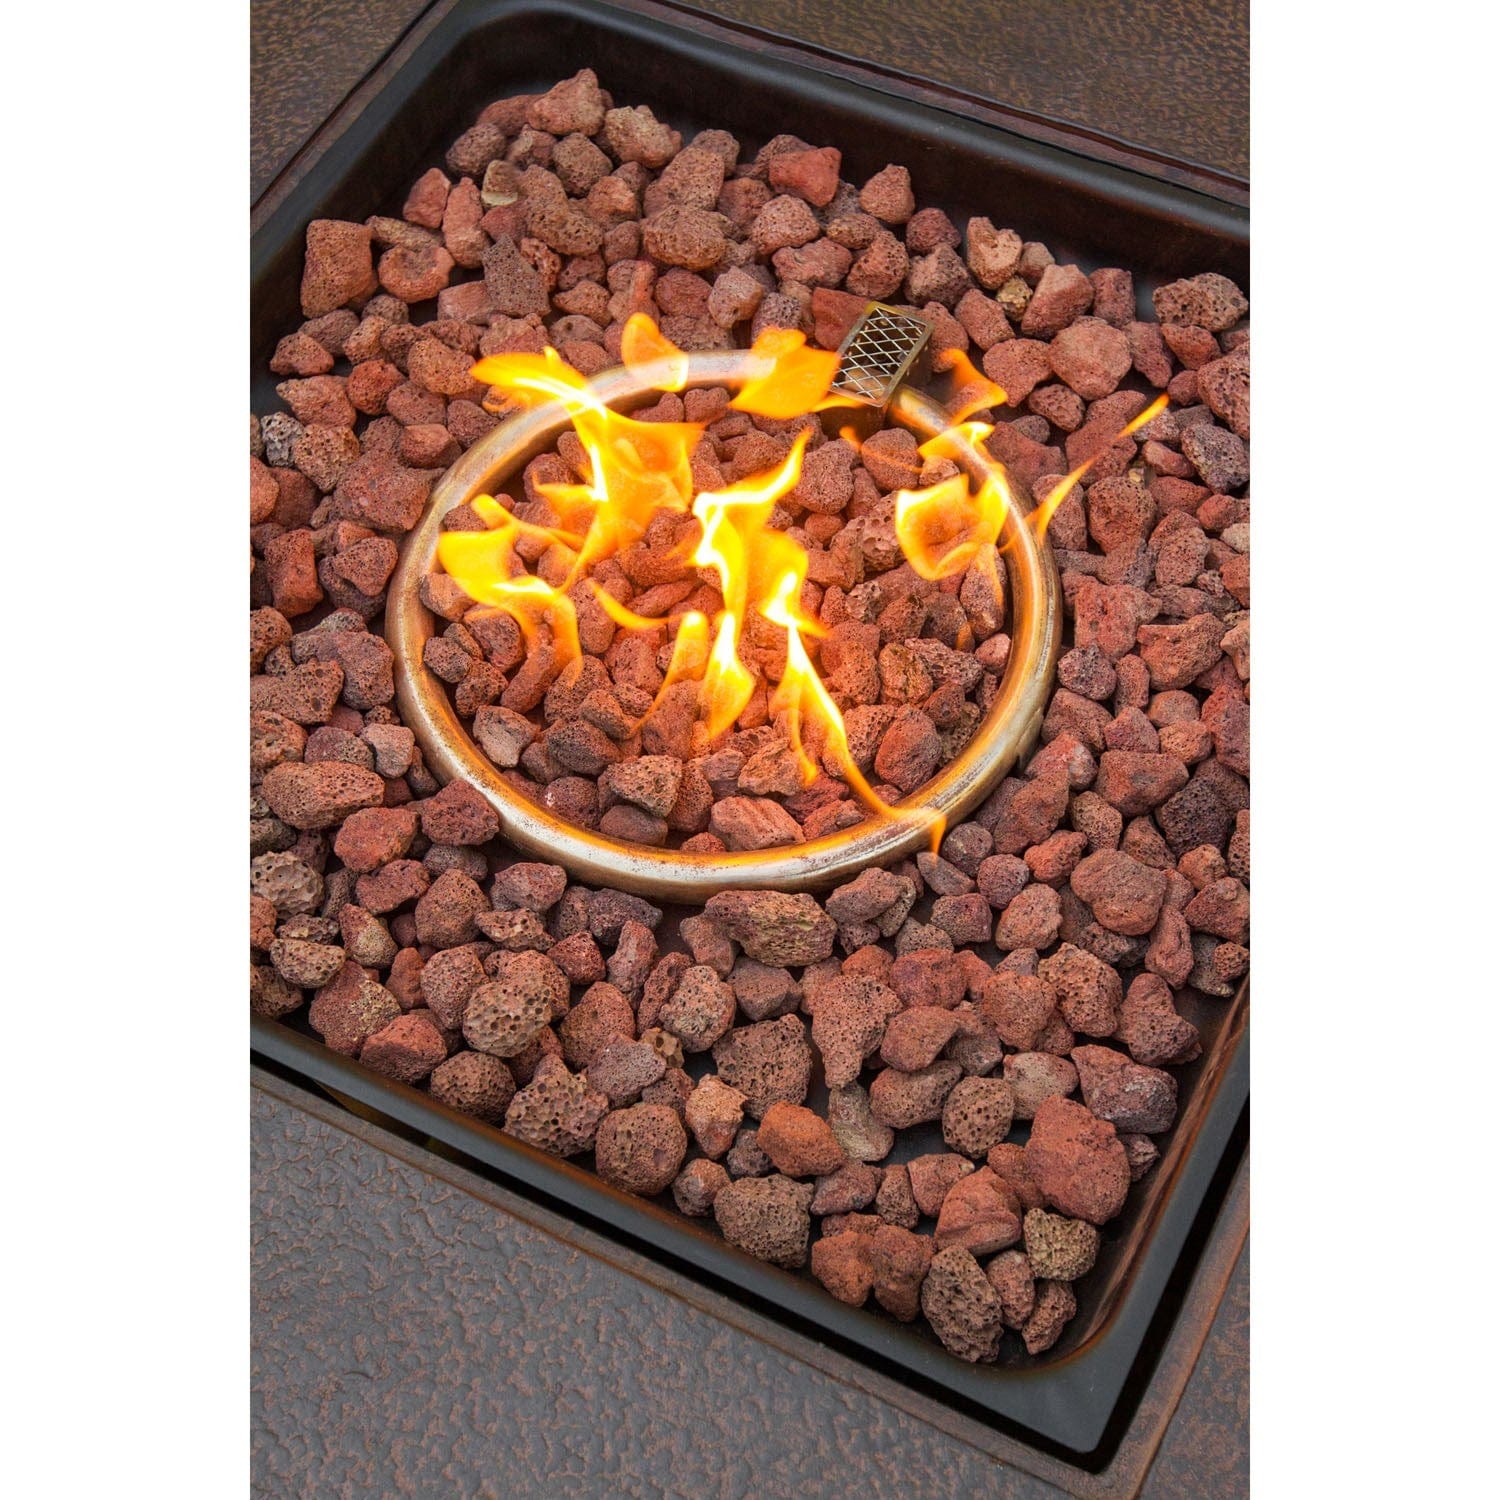 Hanover Fire Pit Chat Set Hanover - Summer Night 5pc Fire Pit Set: 4 Spring Chairs and Durastone Fire Pit